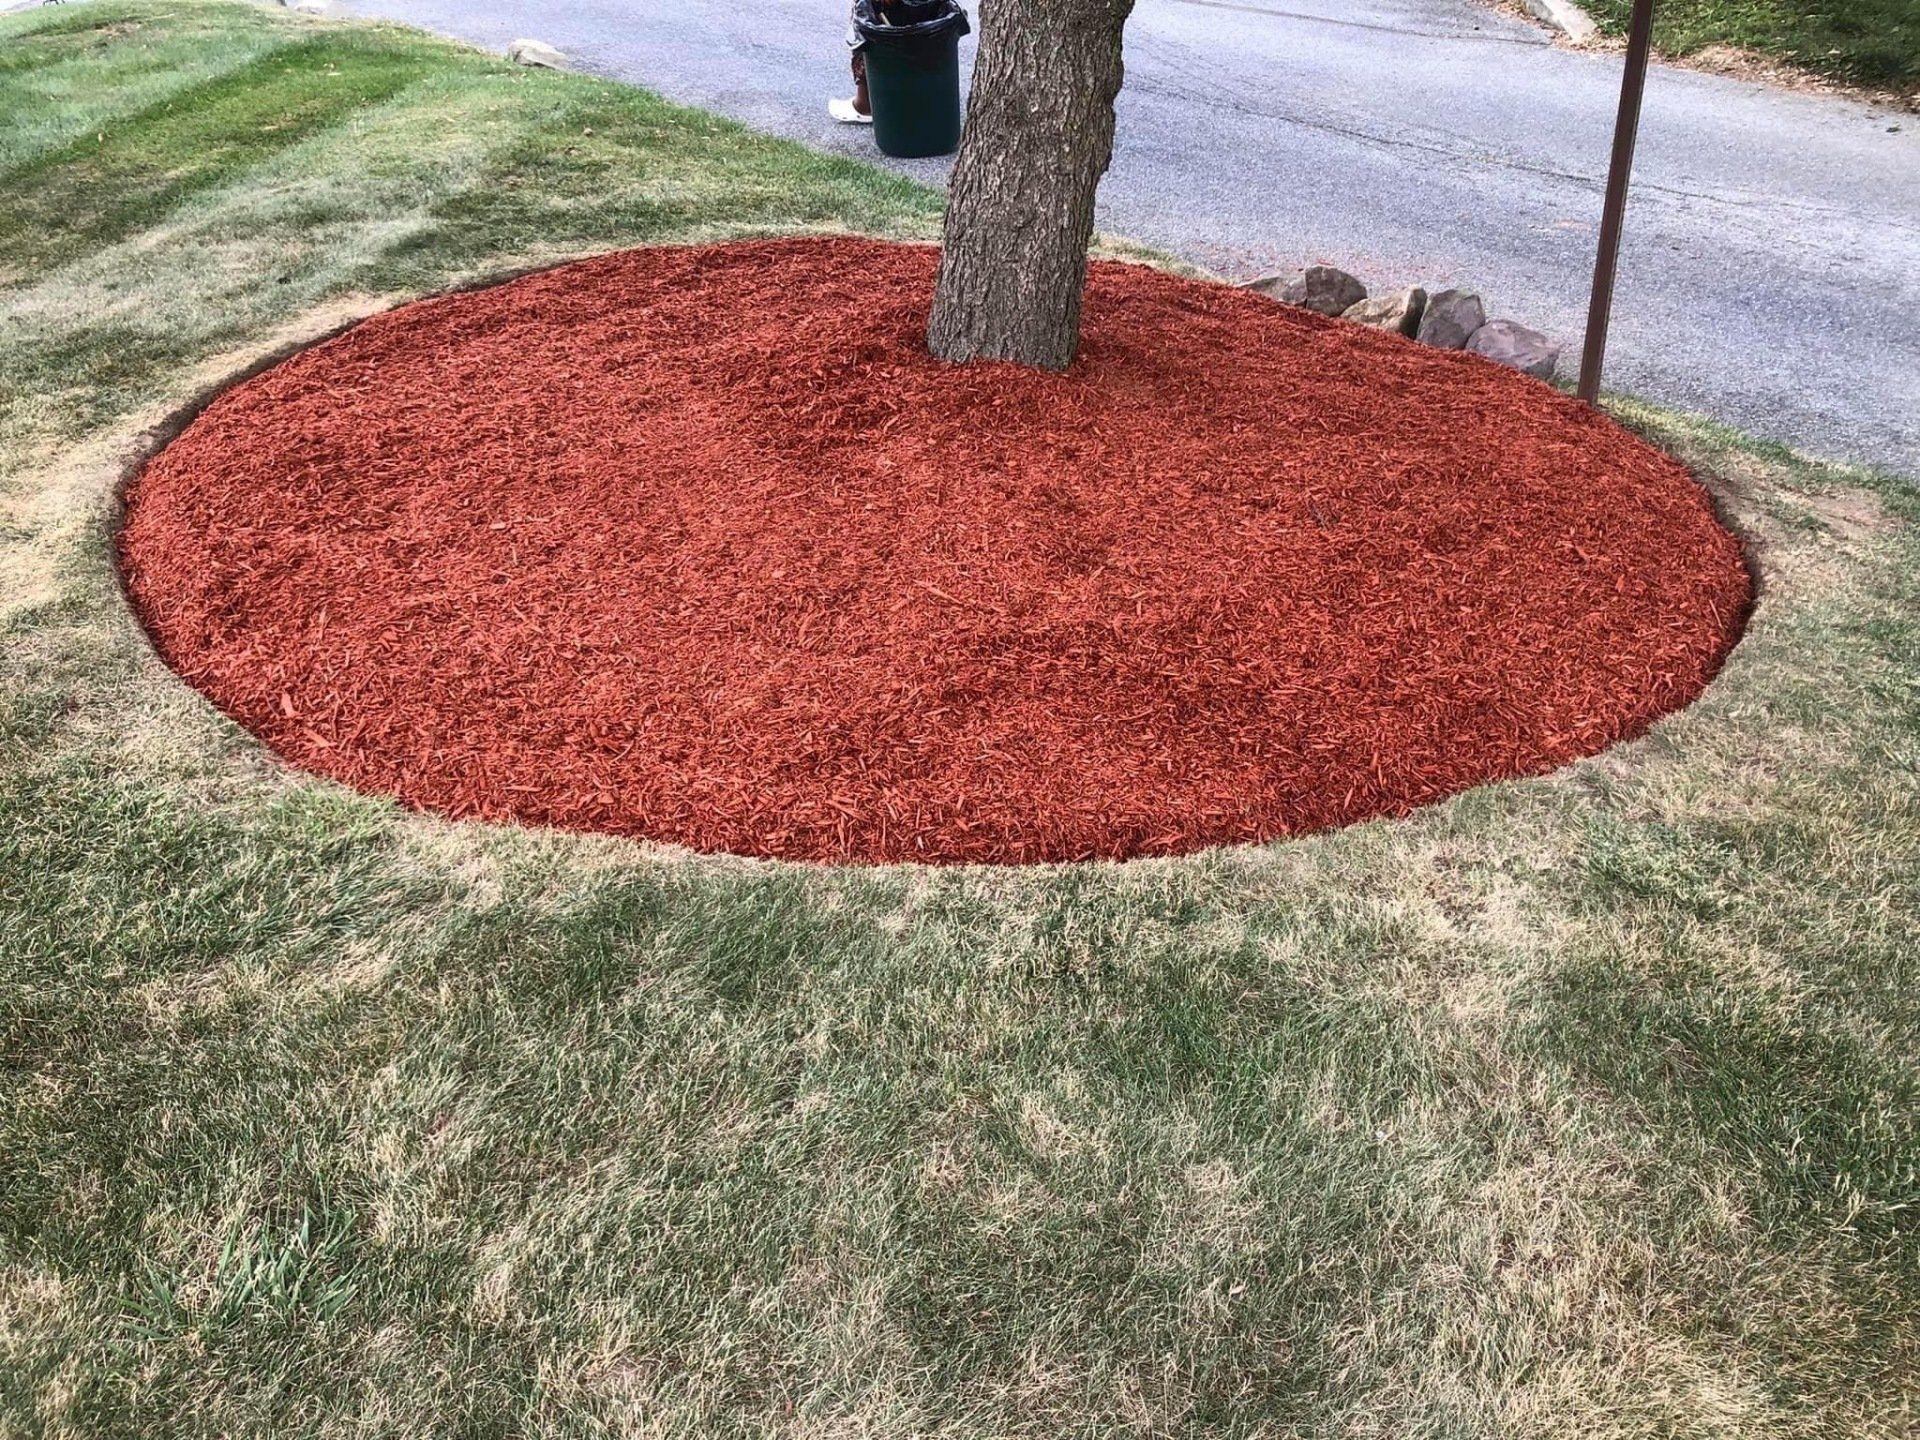 Properly laid red mulch